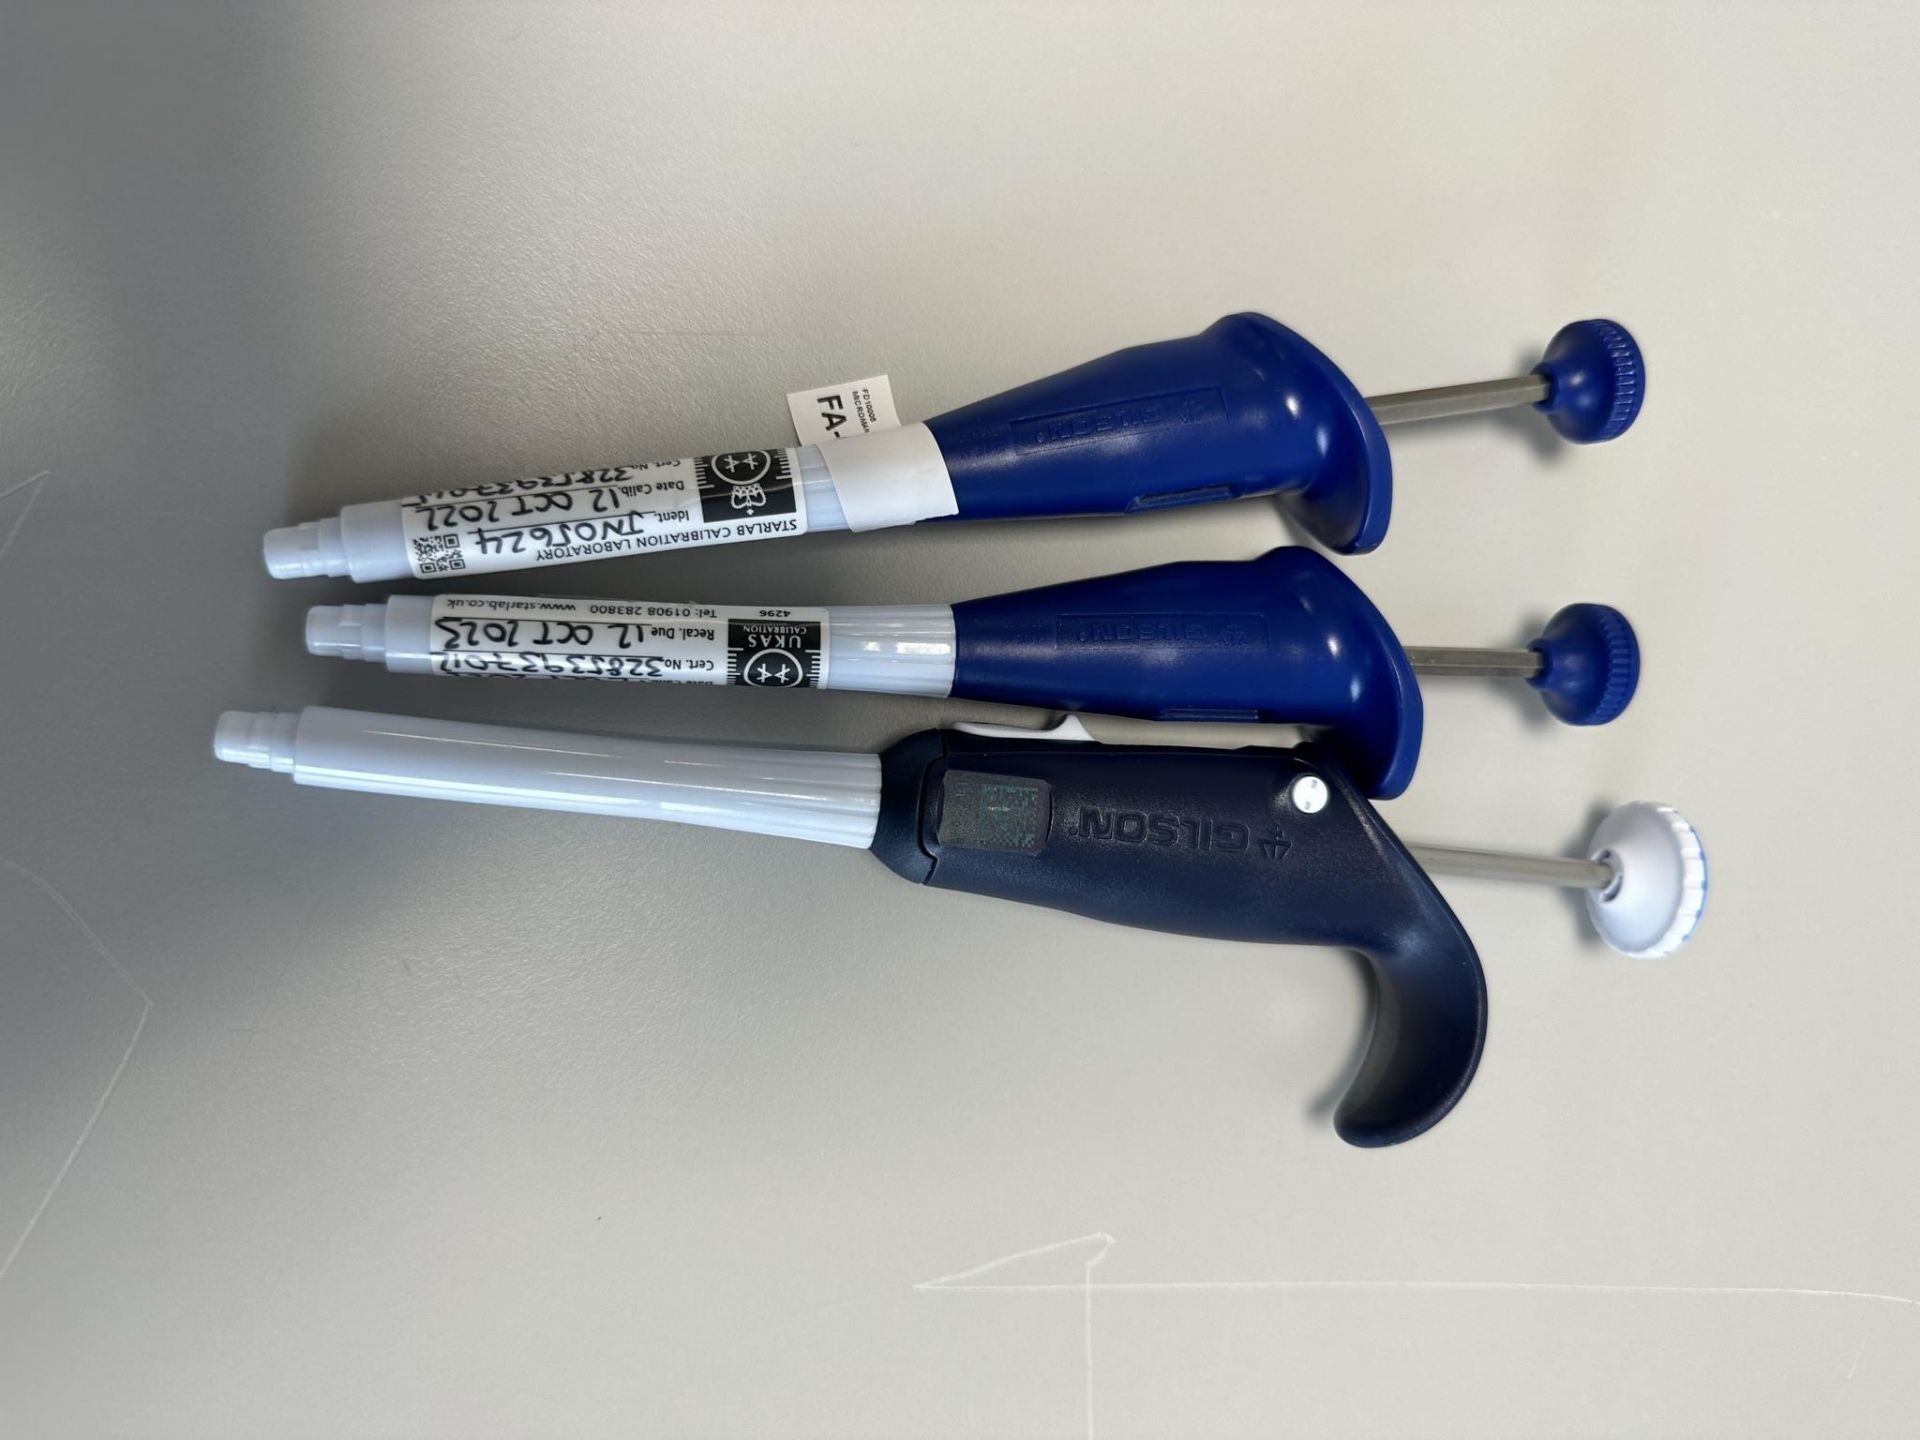 9 x Gilson pipettors w/ stand - As Pictured - Image 4 of 4